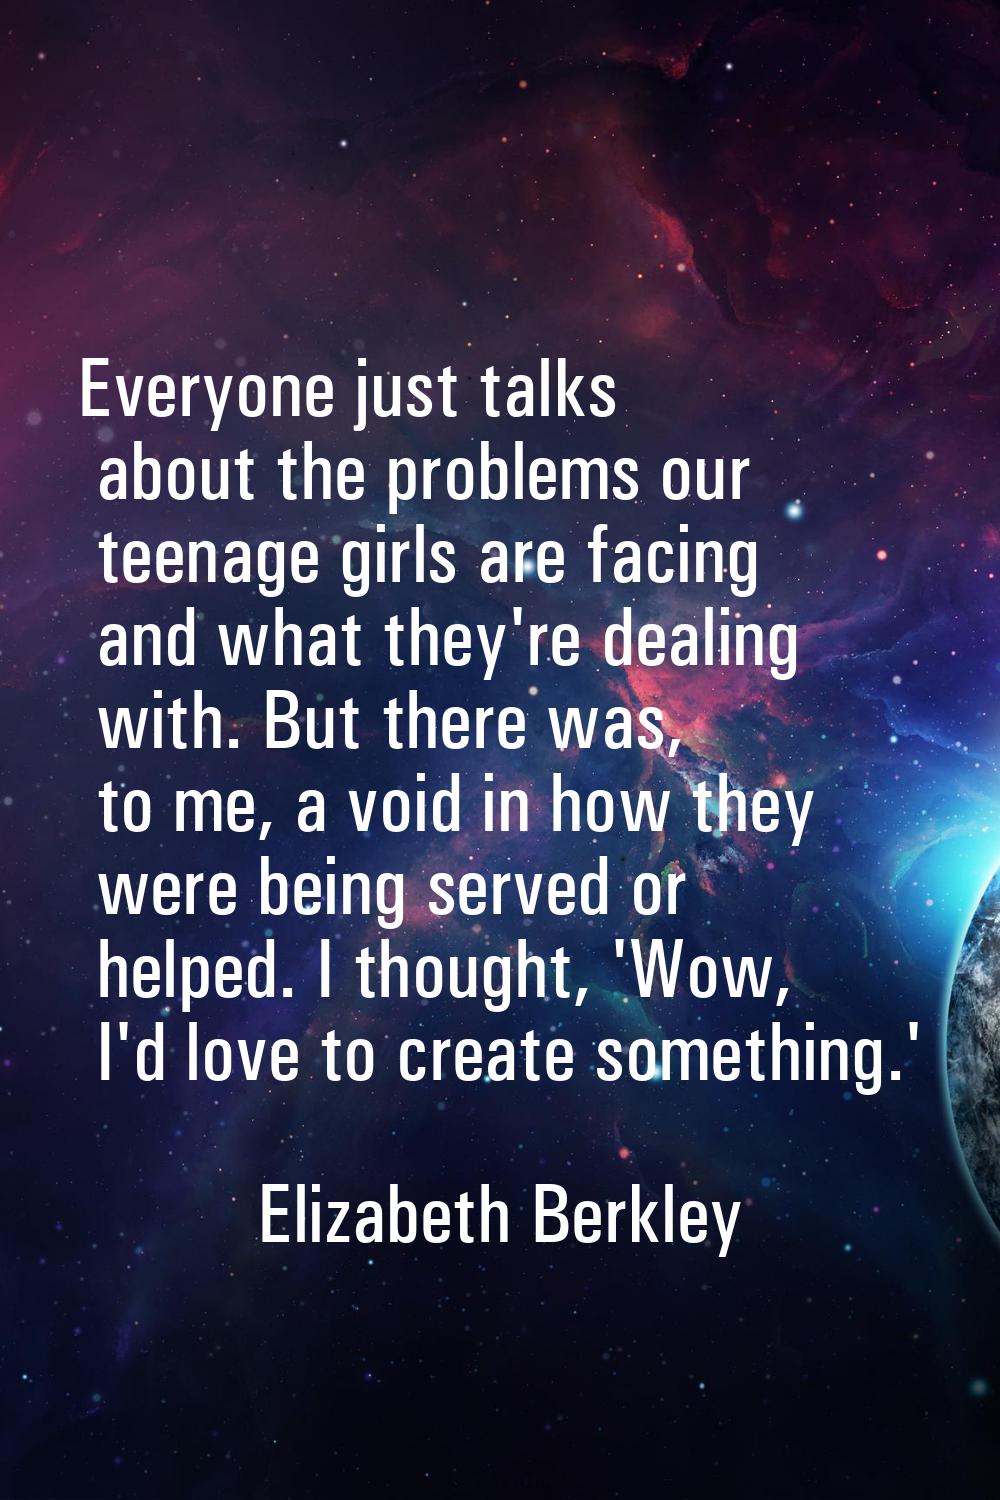 Everyone just talks about the problems our teenage girls are facing and what they're dealing with. 